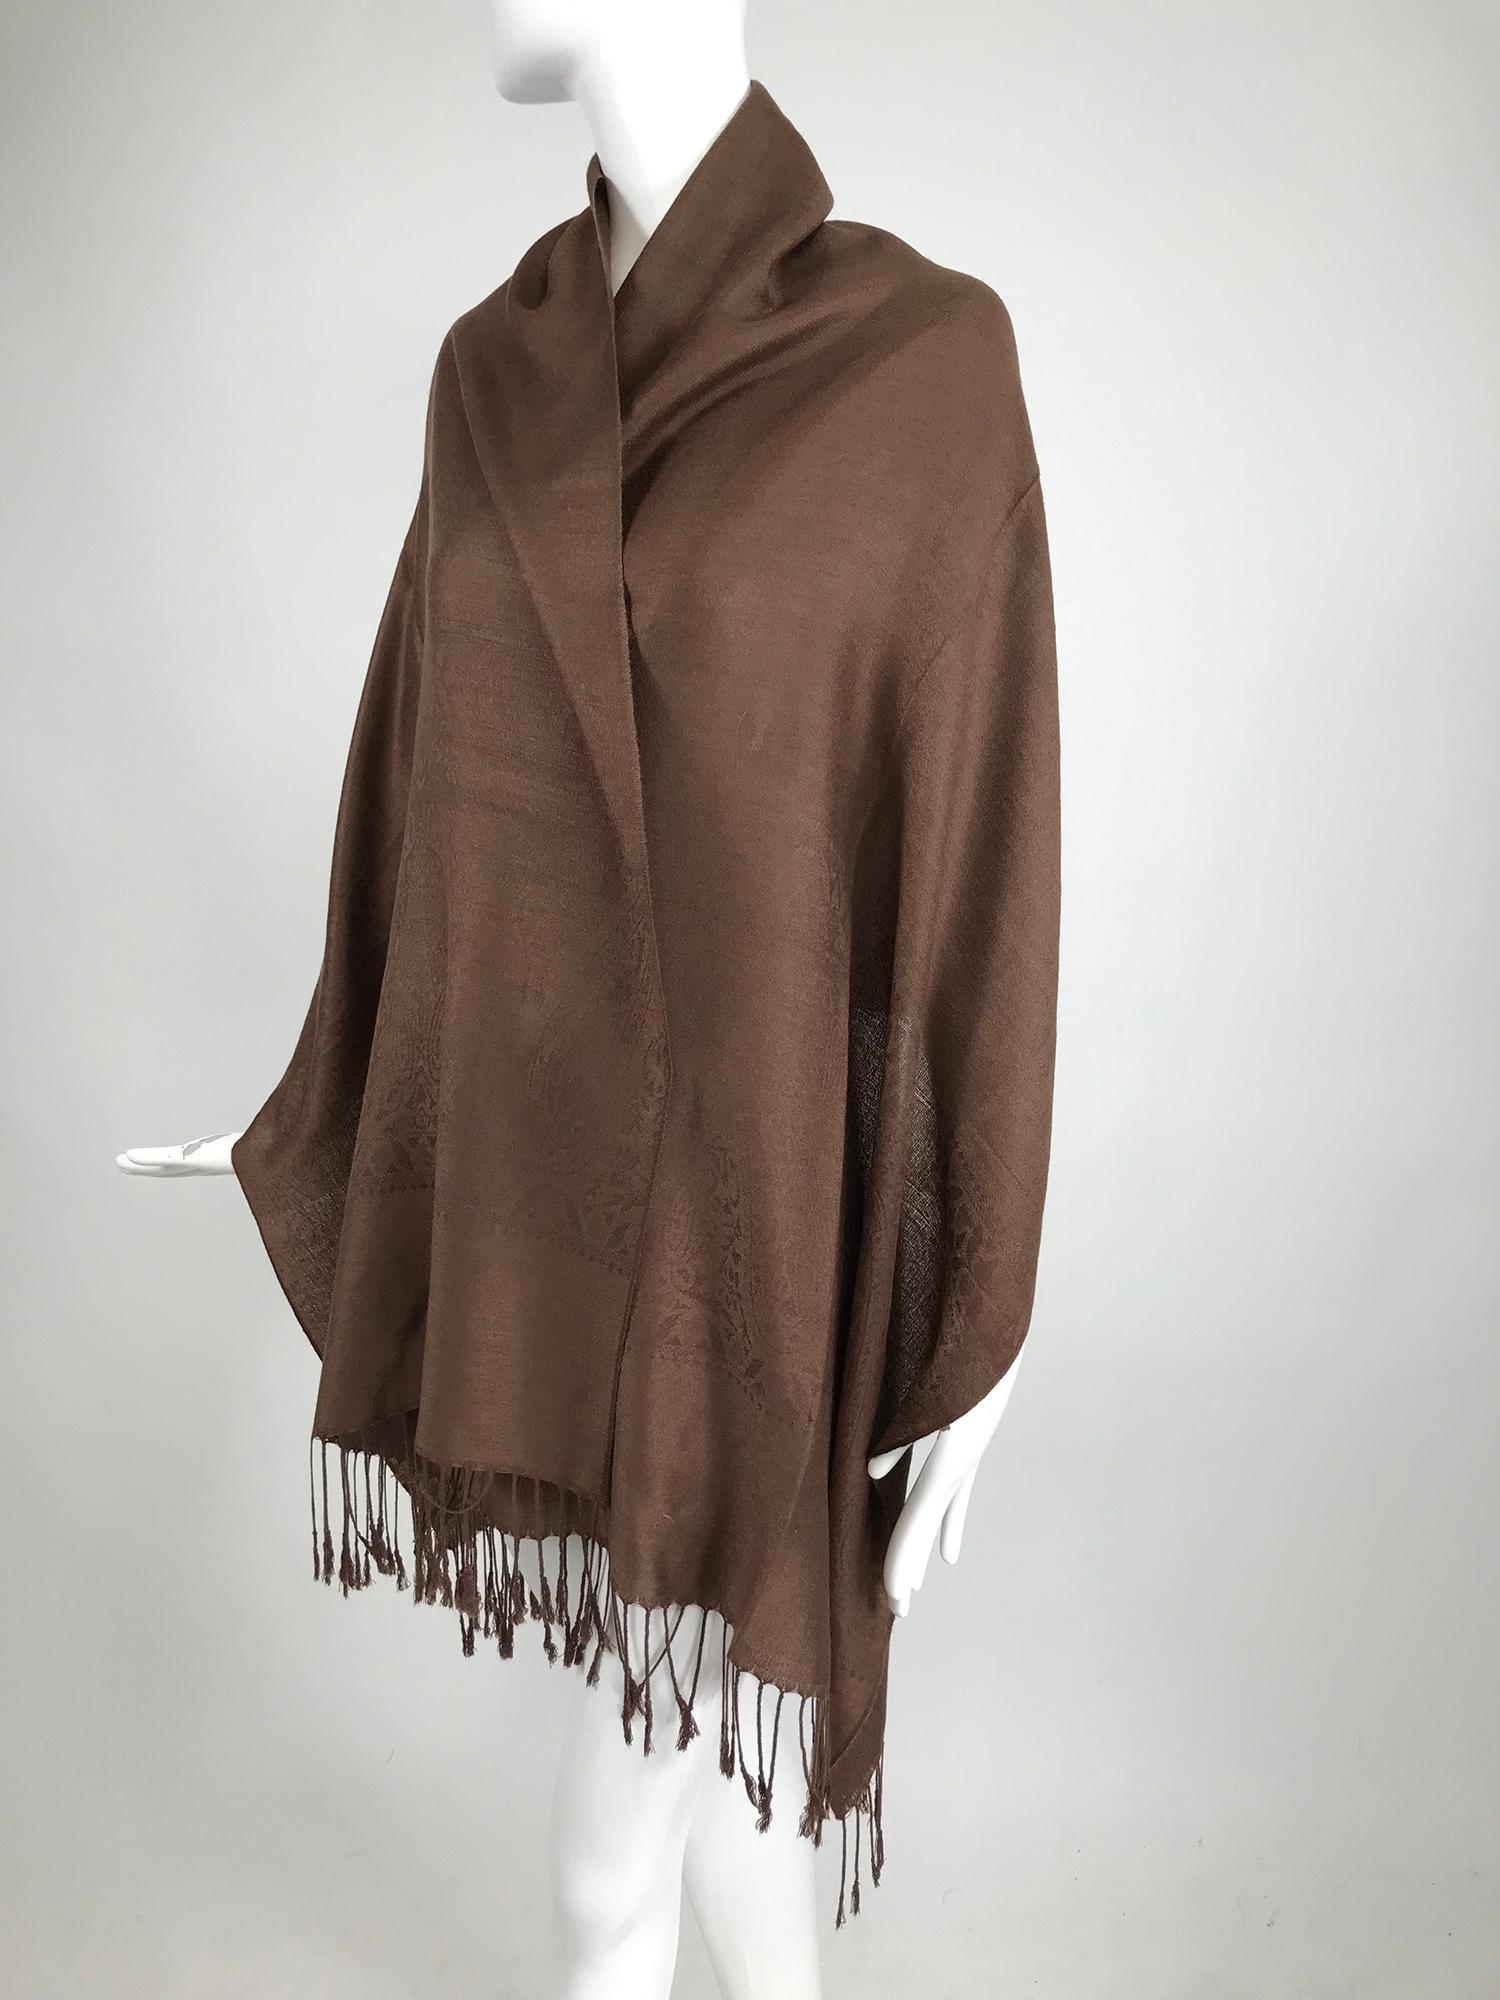 Pashmina and silk shawl in chocolate brown, it looks unworn. This beautiful shawl is woven in a classic paisley design. Wide and long it has knotted fringe on either end. In excellent condition.
Measurements are in inches:
Width 27
Length 75
Fringe